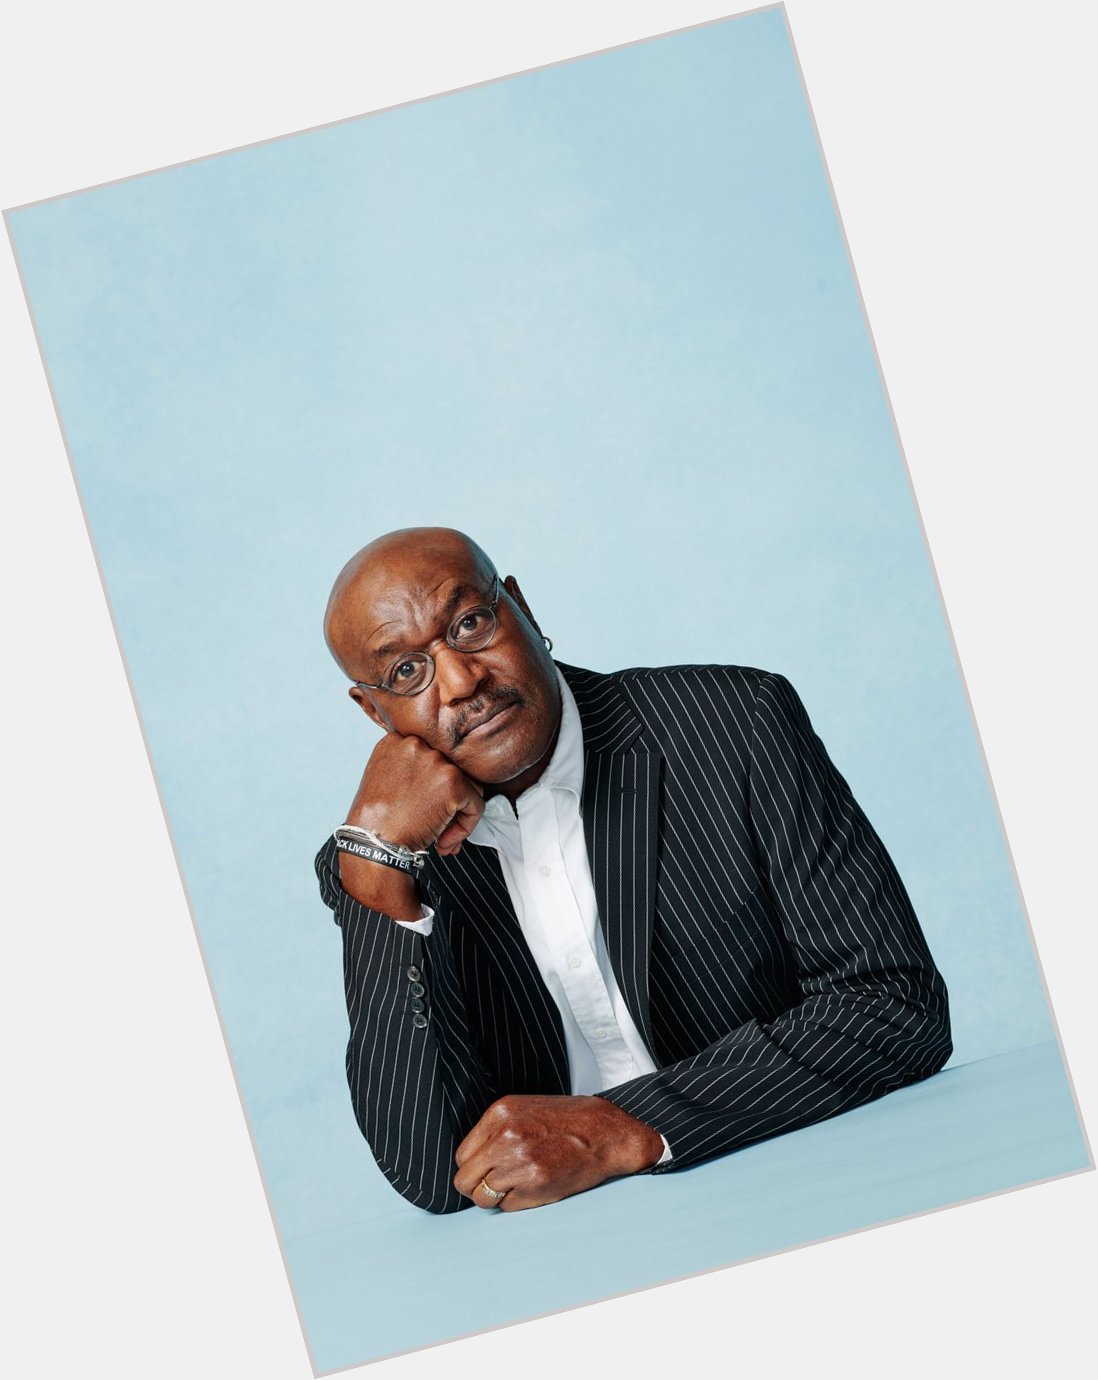 Wishing the incredible Delroy Lindo a very Happy Birthday 